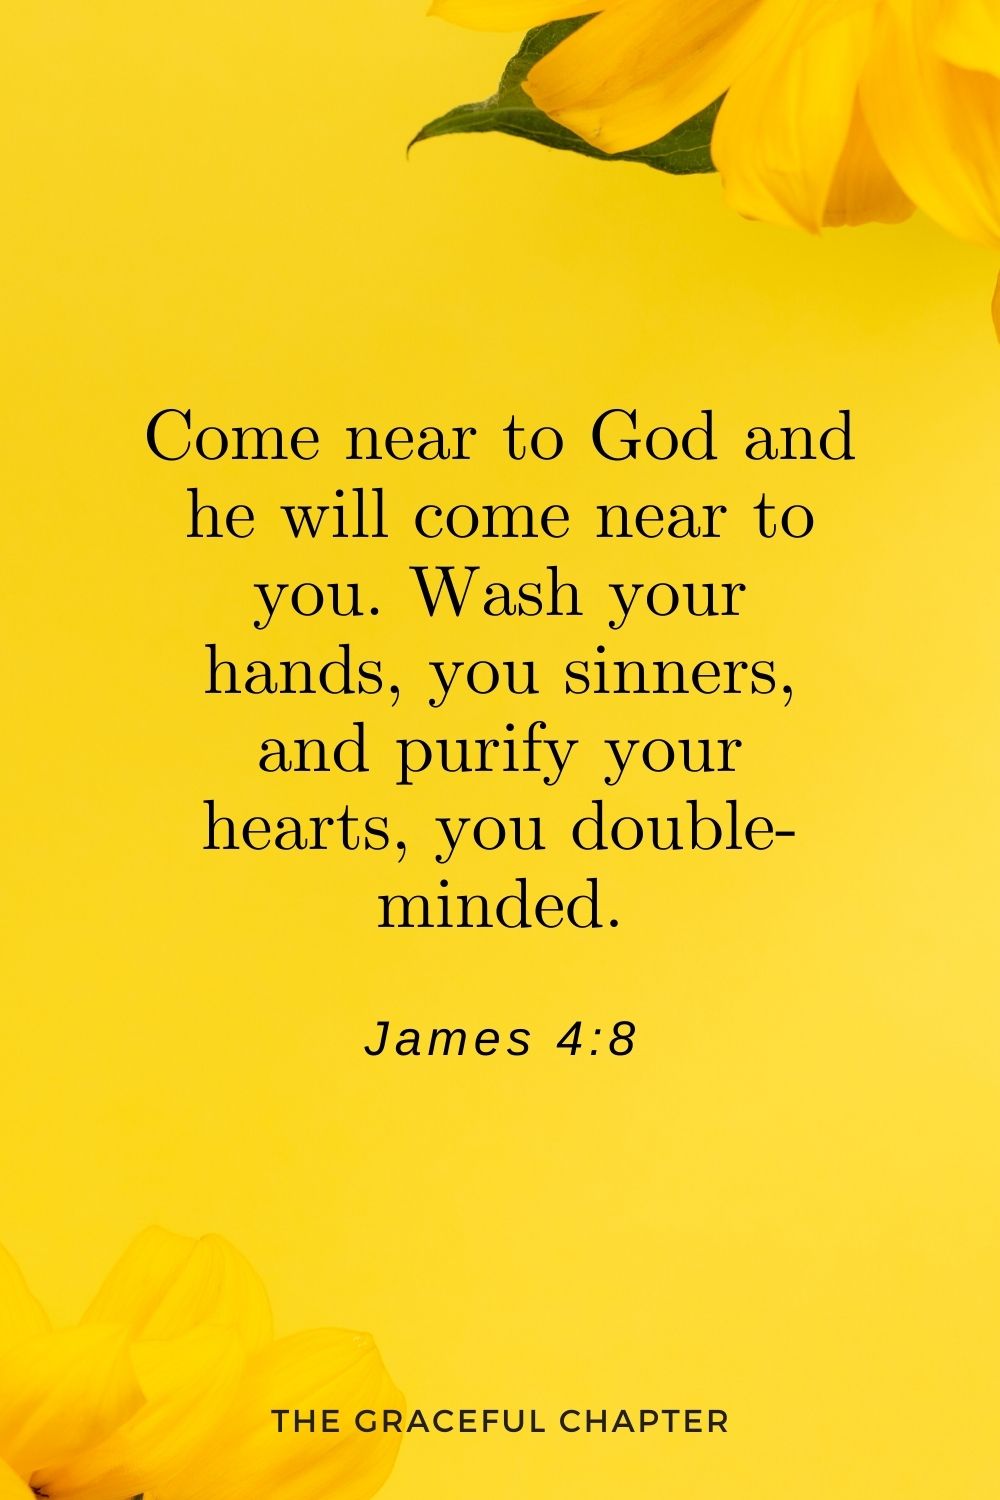 Come near to God and he will come near to you. Wash your hands, you sinners, and purify your hearts, you double-minded. James 4:8